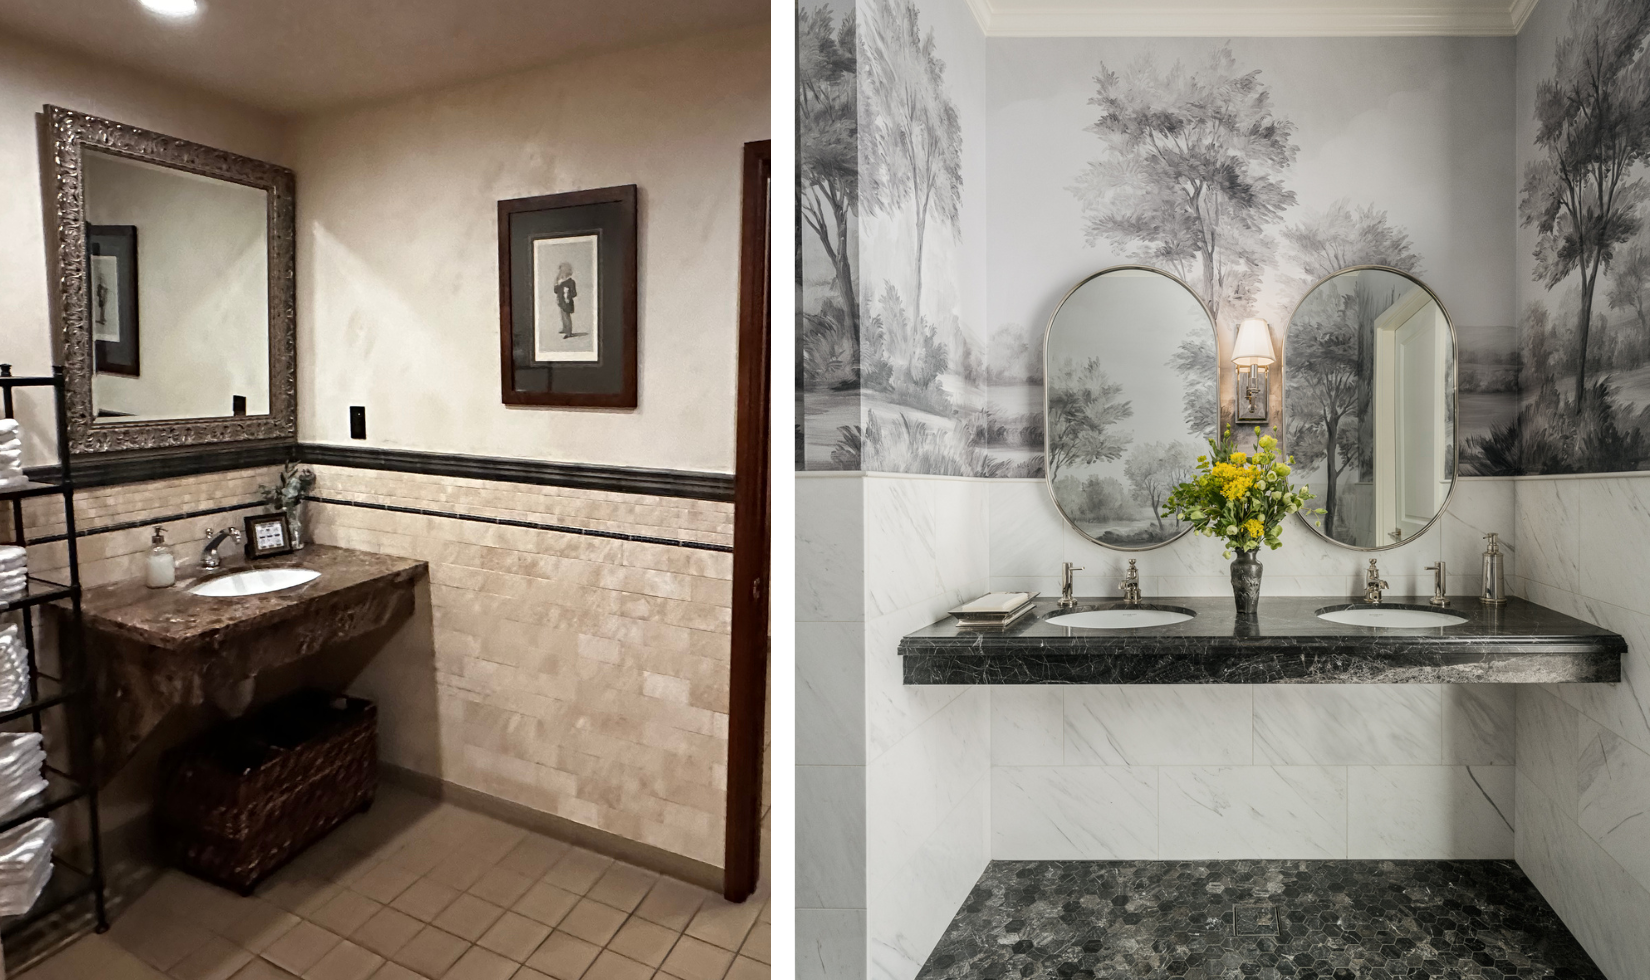 before and after photos of a men's bathroom. left image has dark wood accents and tiled flooring and right photo has intricate black and white wallpaper with two silver mirrors, a black marble countertop and a vase of yellow flowers.